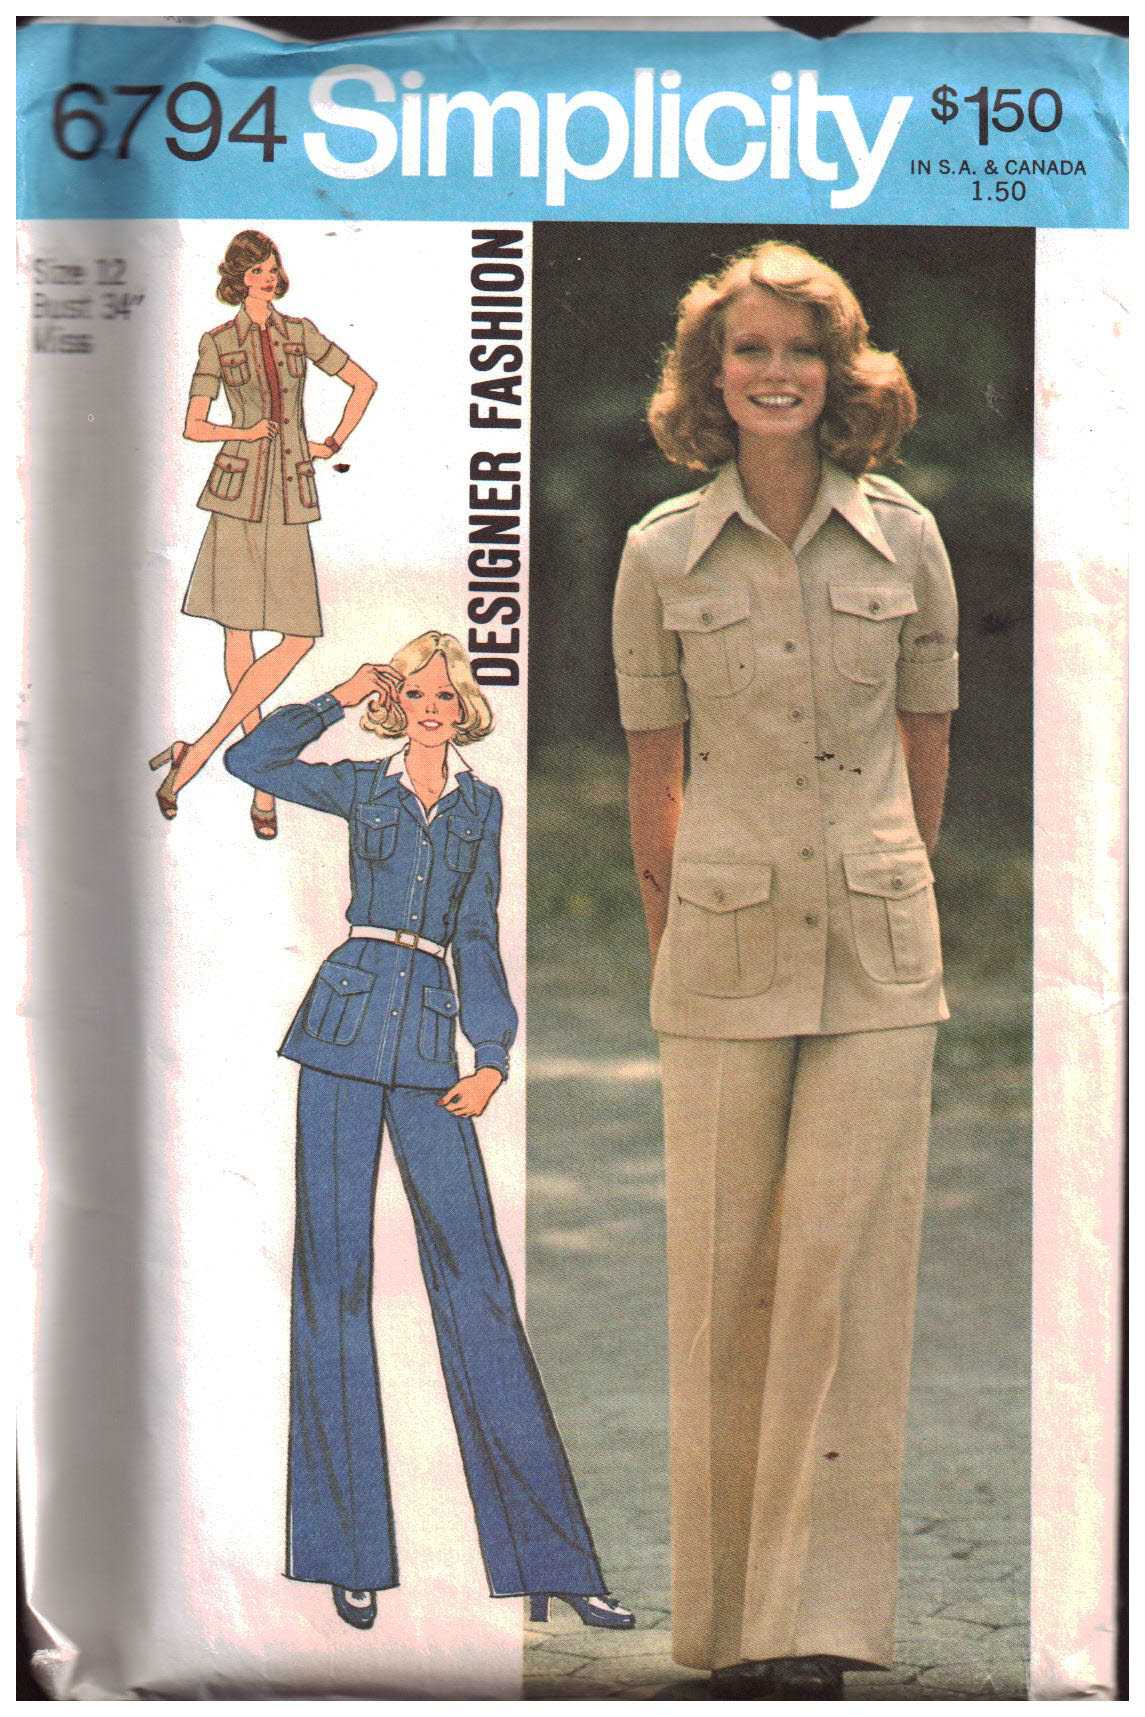 Simplicity Sewing Pattern 5144. Uncut Pattern. Vintage Suit and Overblouse  Pattern. - Etsy